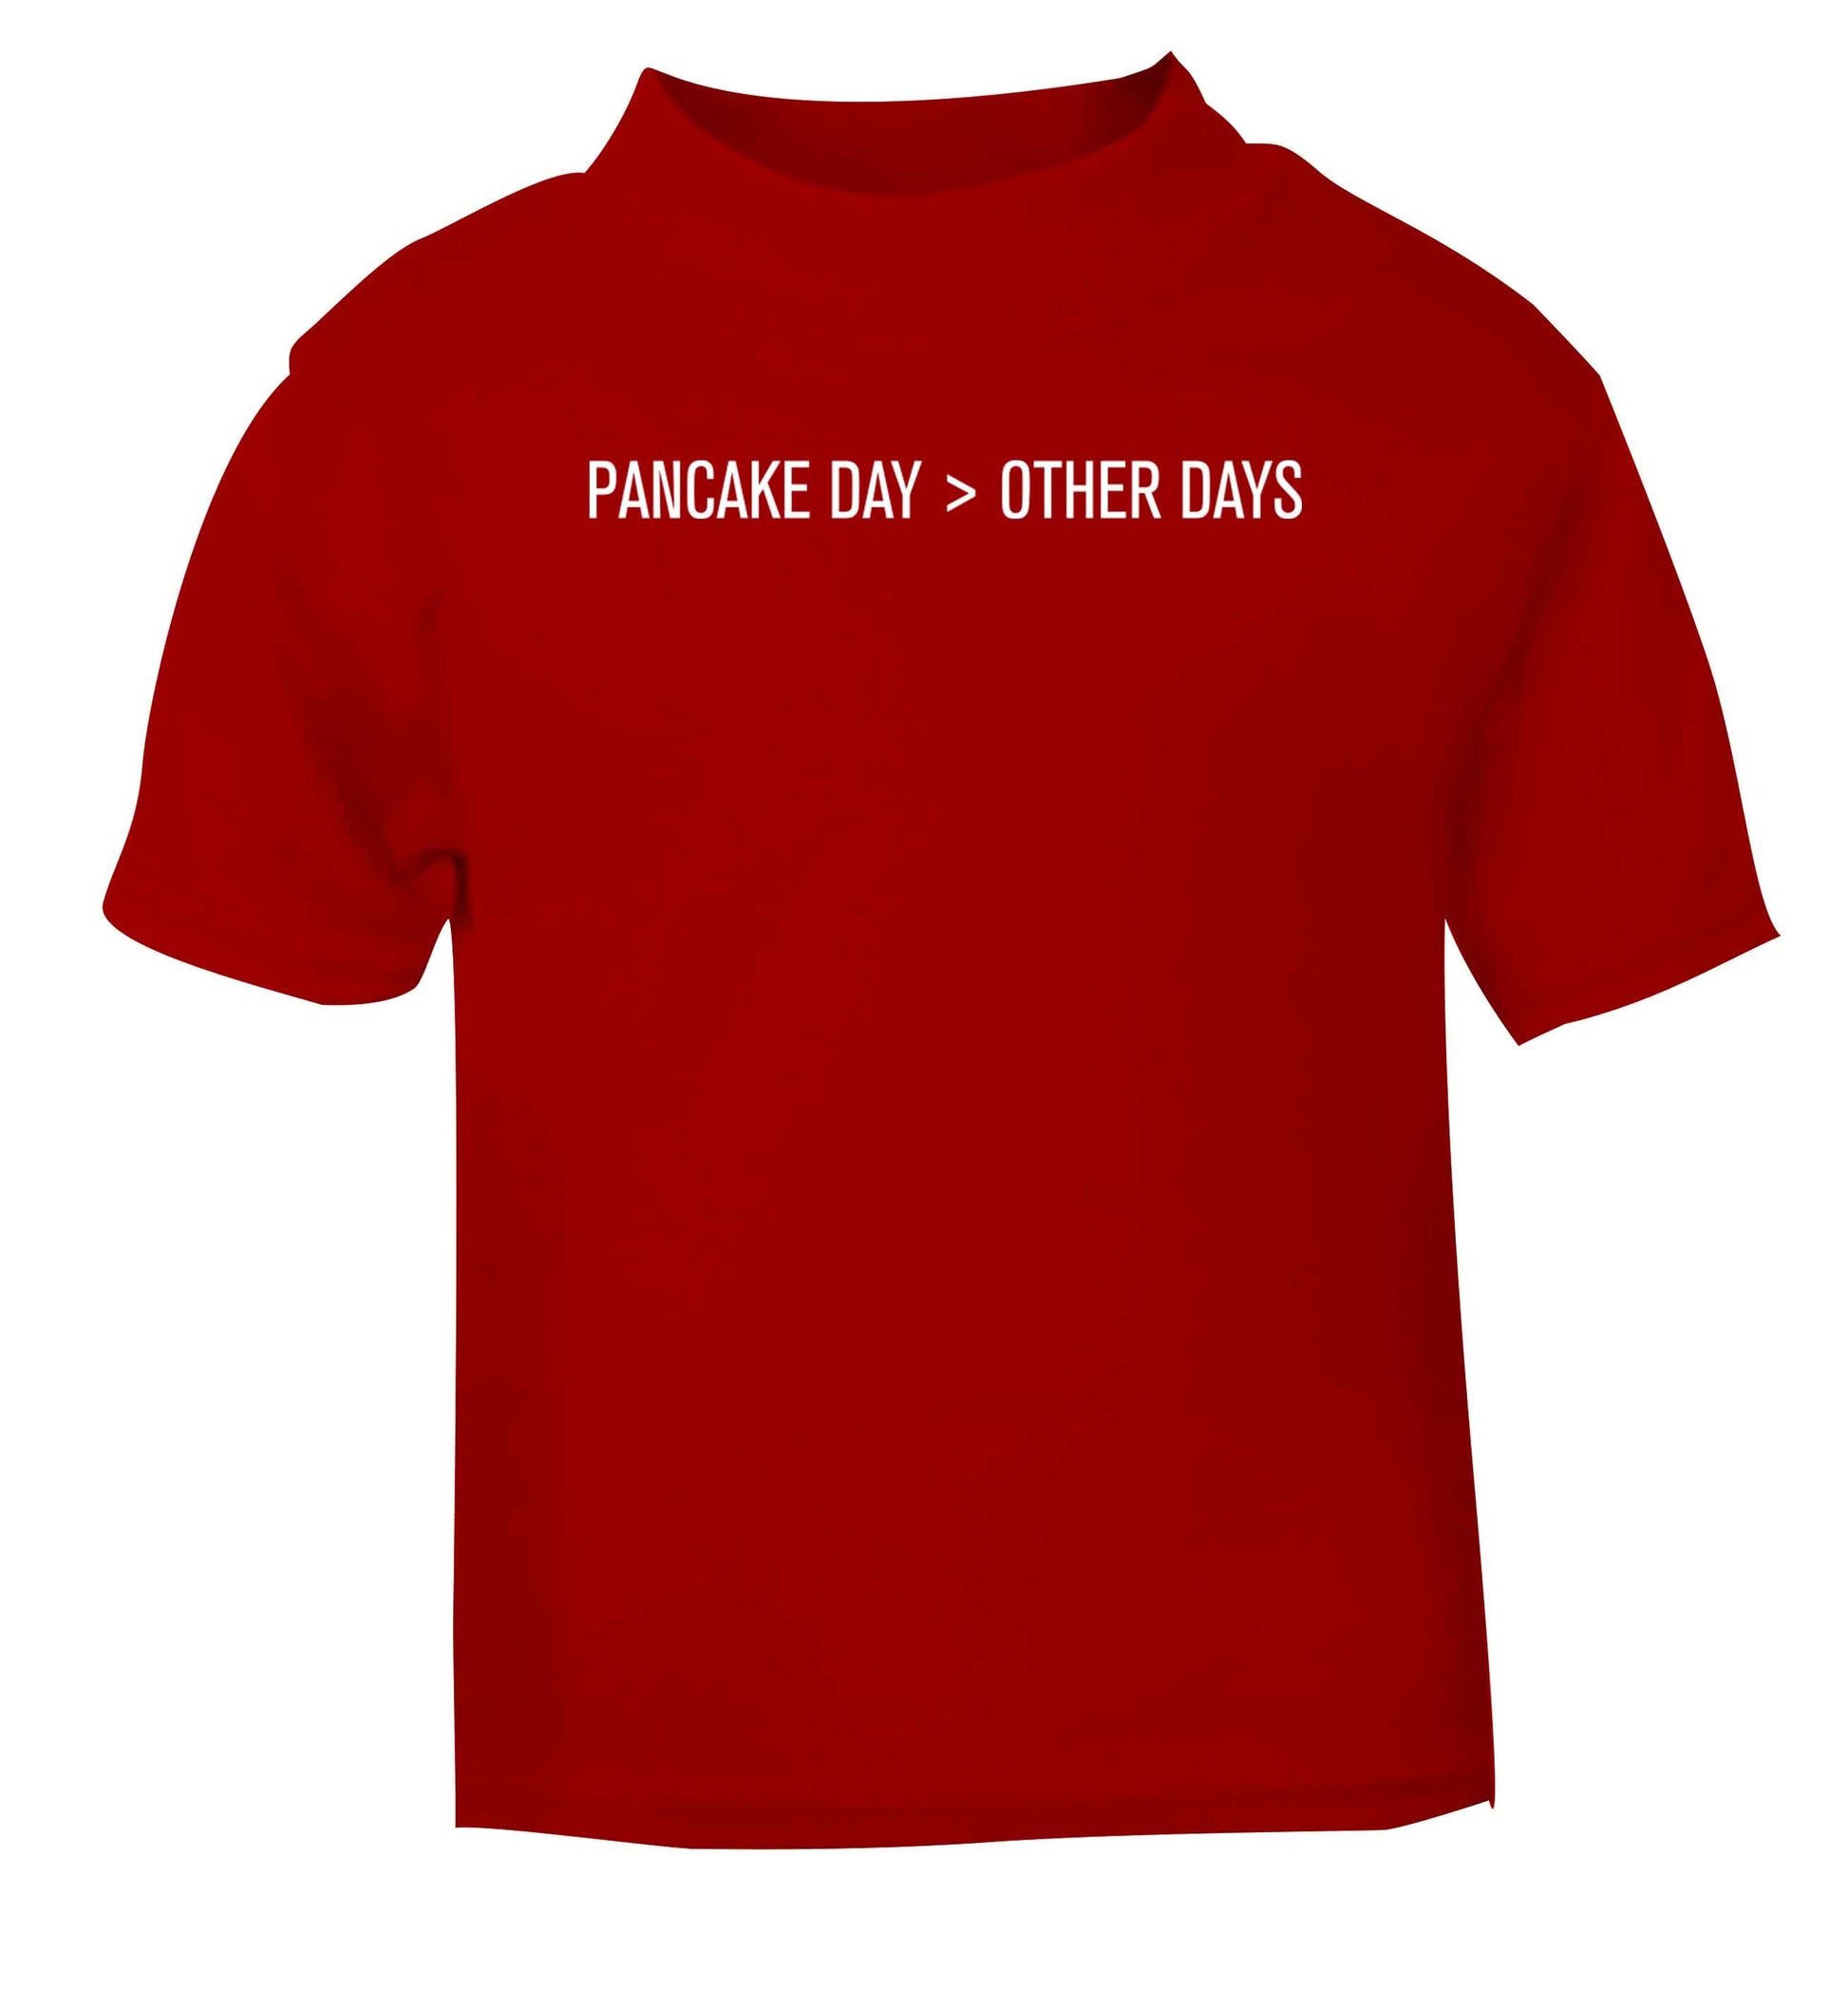 Pancake day > other days red baby toddler Tshirt 2 Years